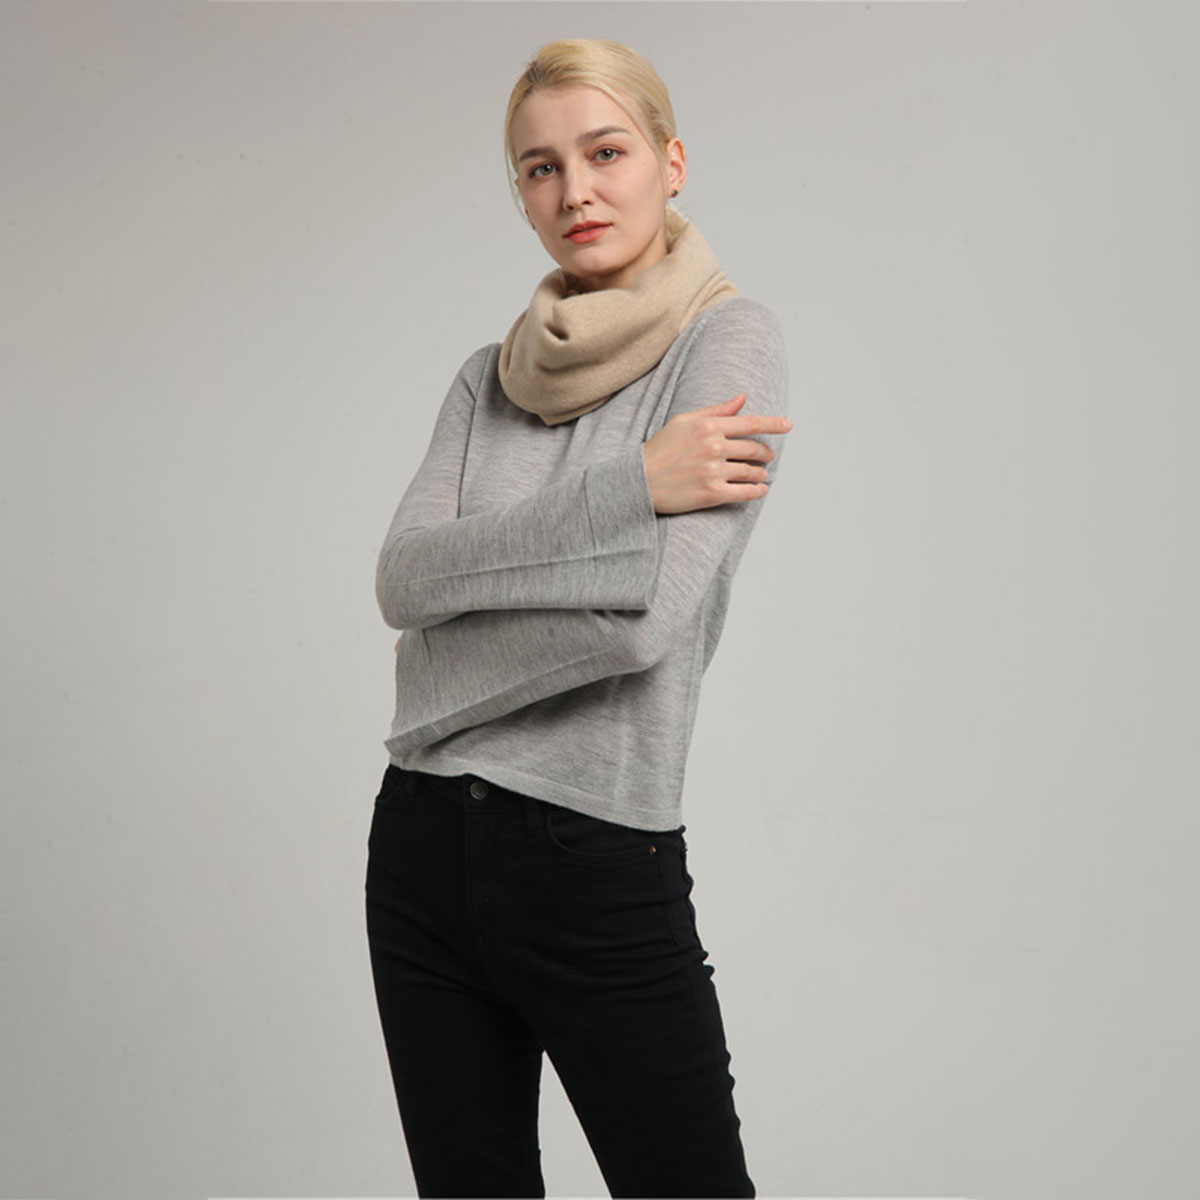 real cashmere scarf